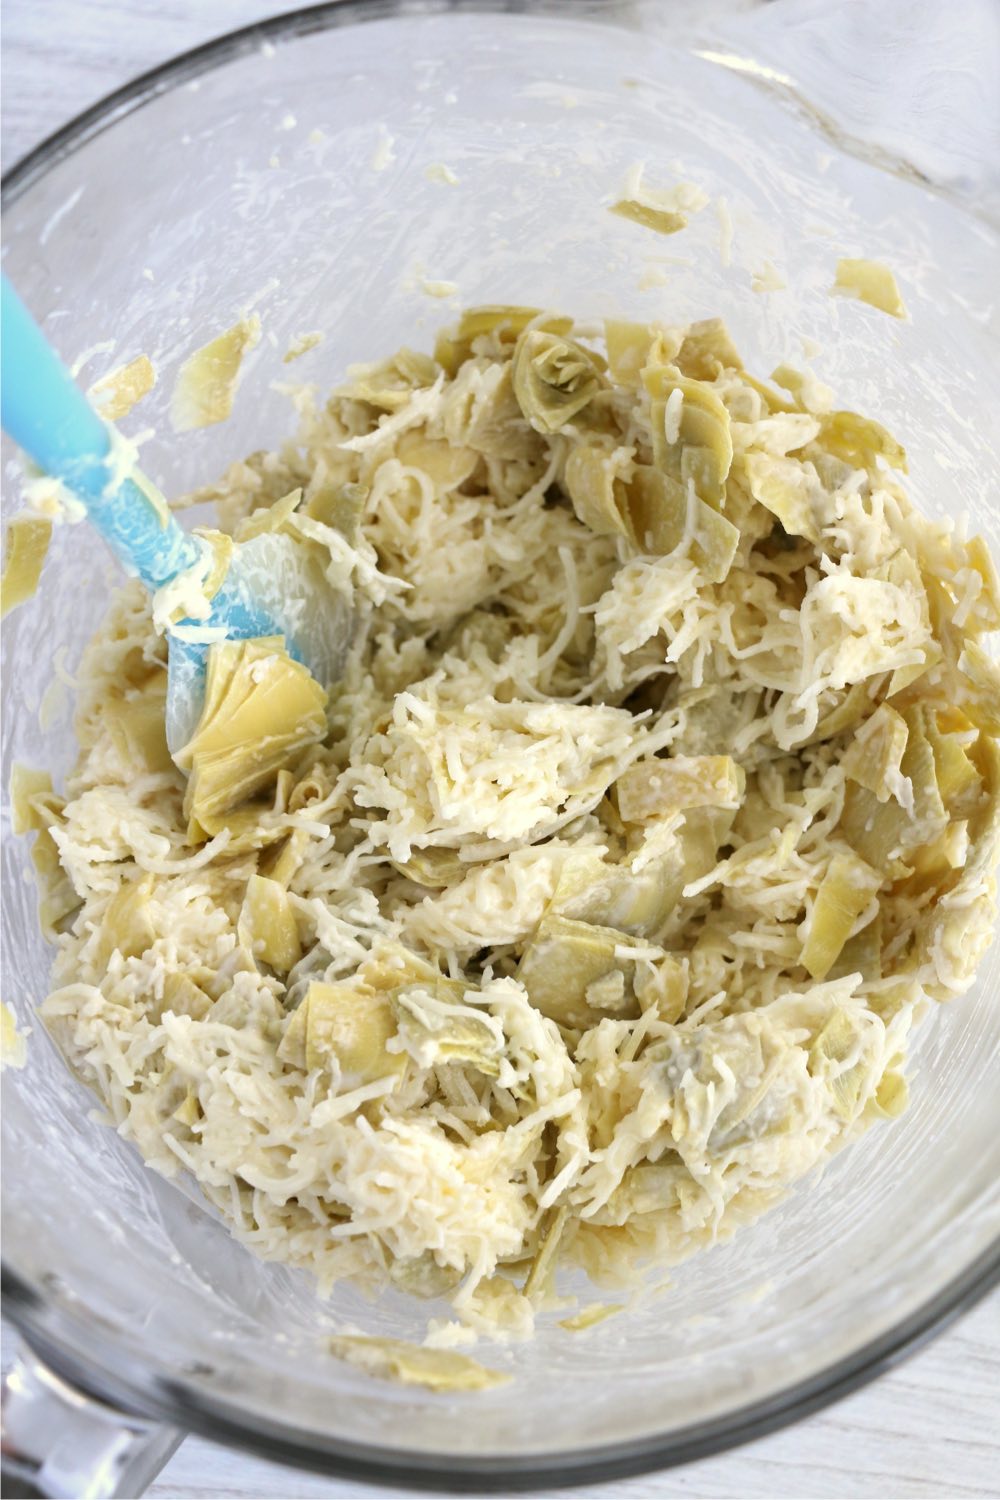 Mixing artichoke hearts with mayonnaise and cheese